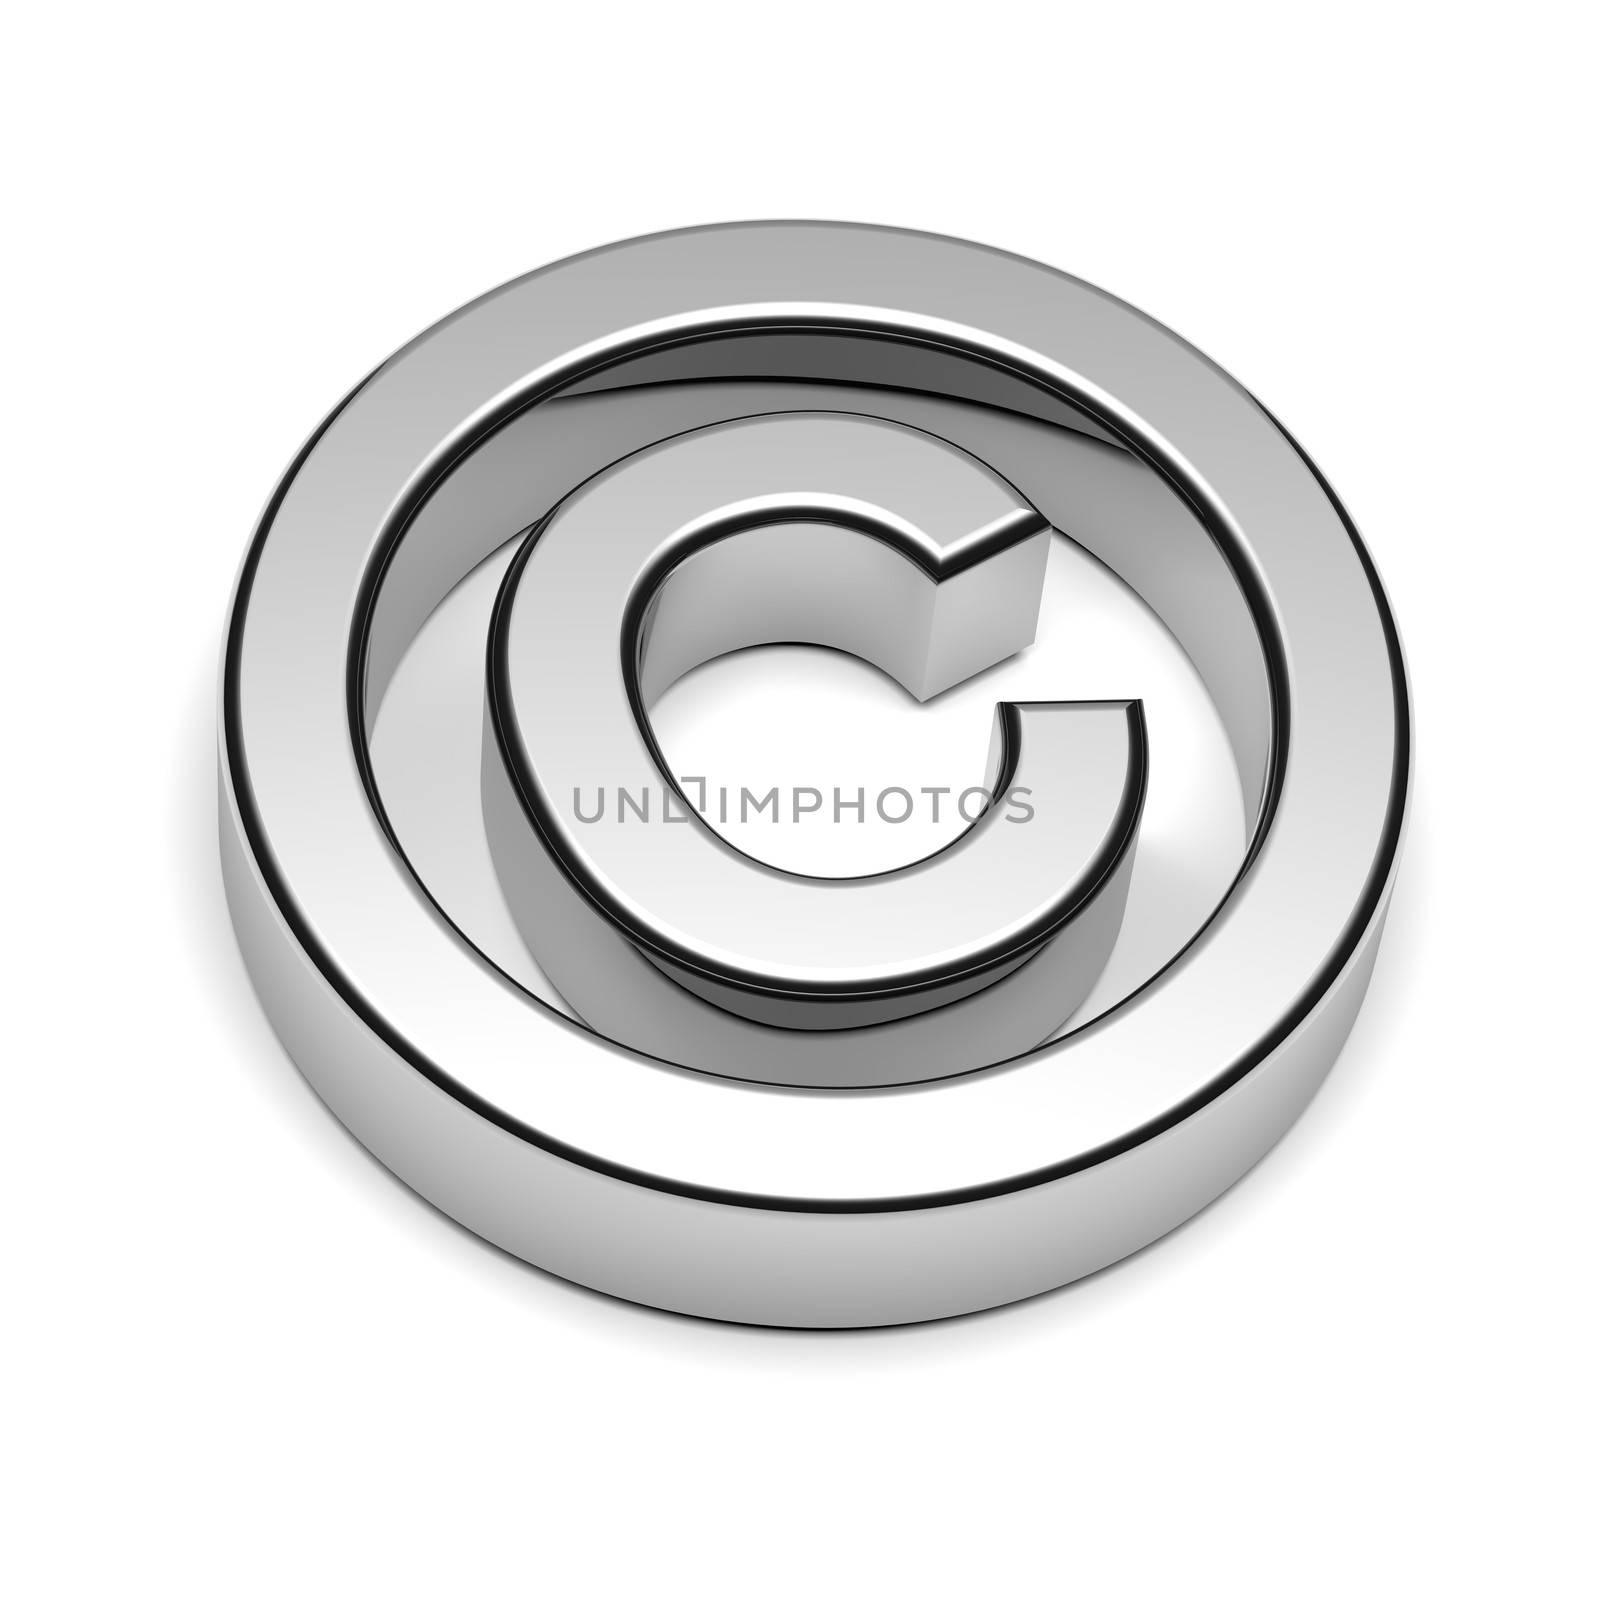 Copyright Chrome Sign Isolated on White Background with Shadow 3D illustration